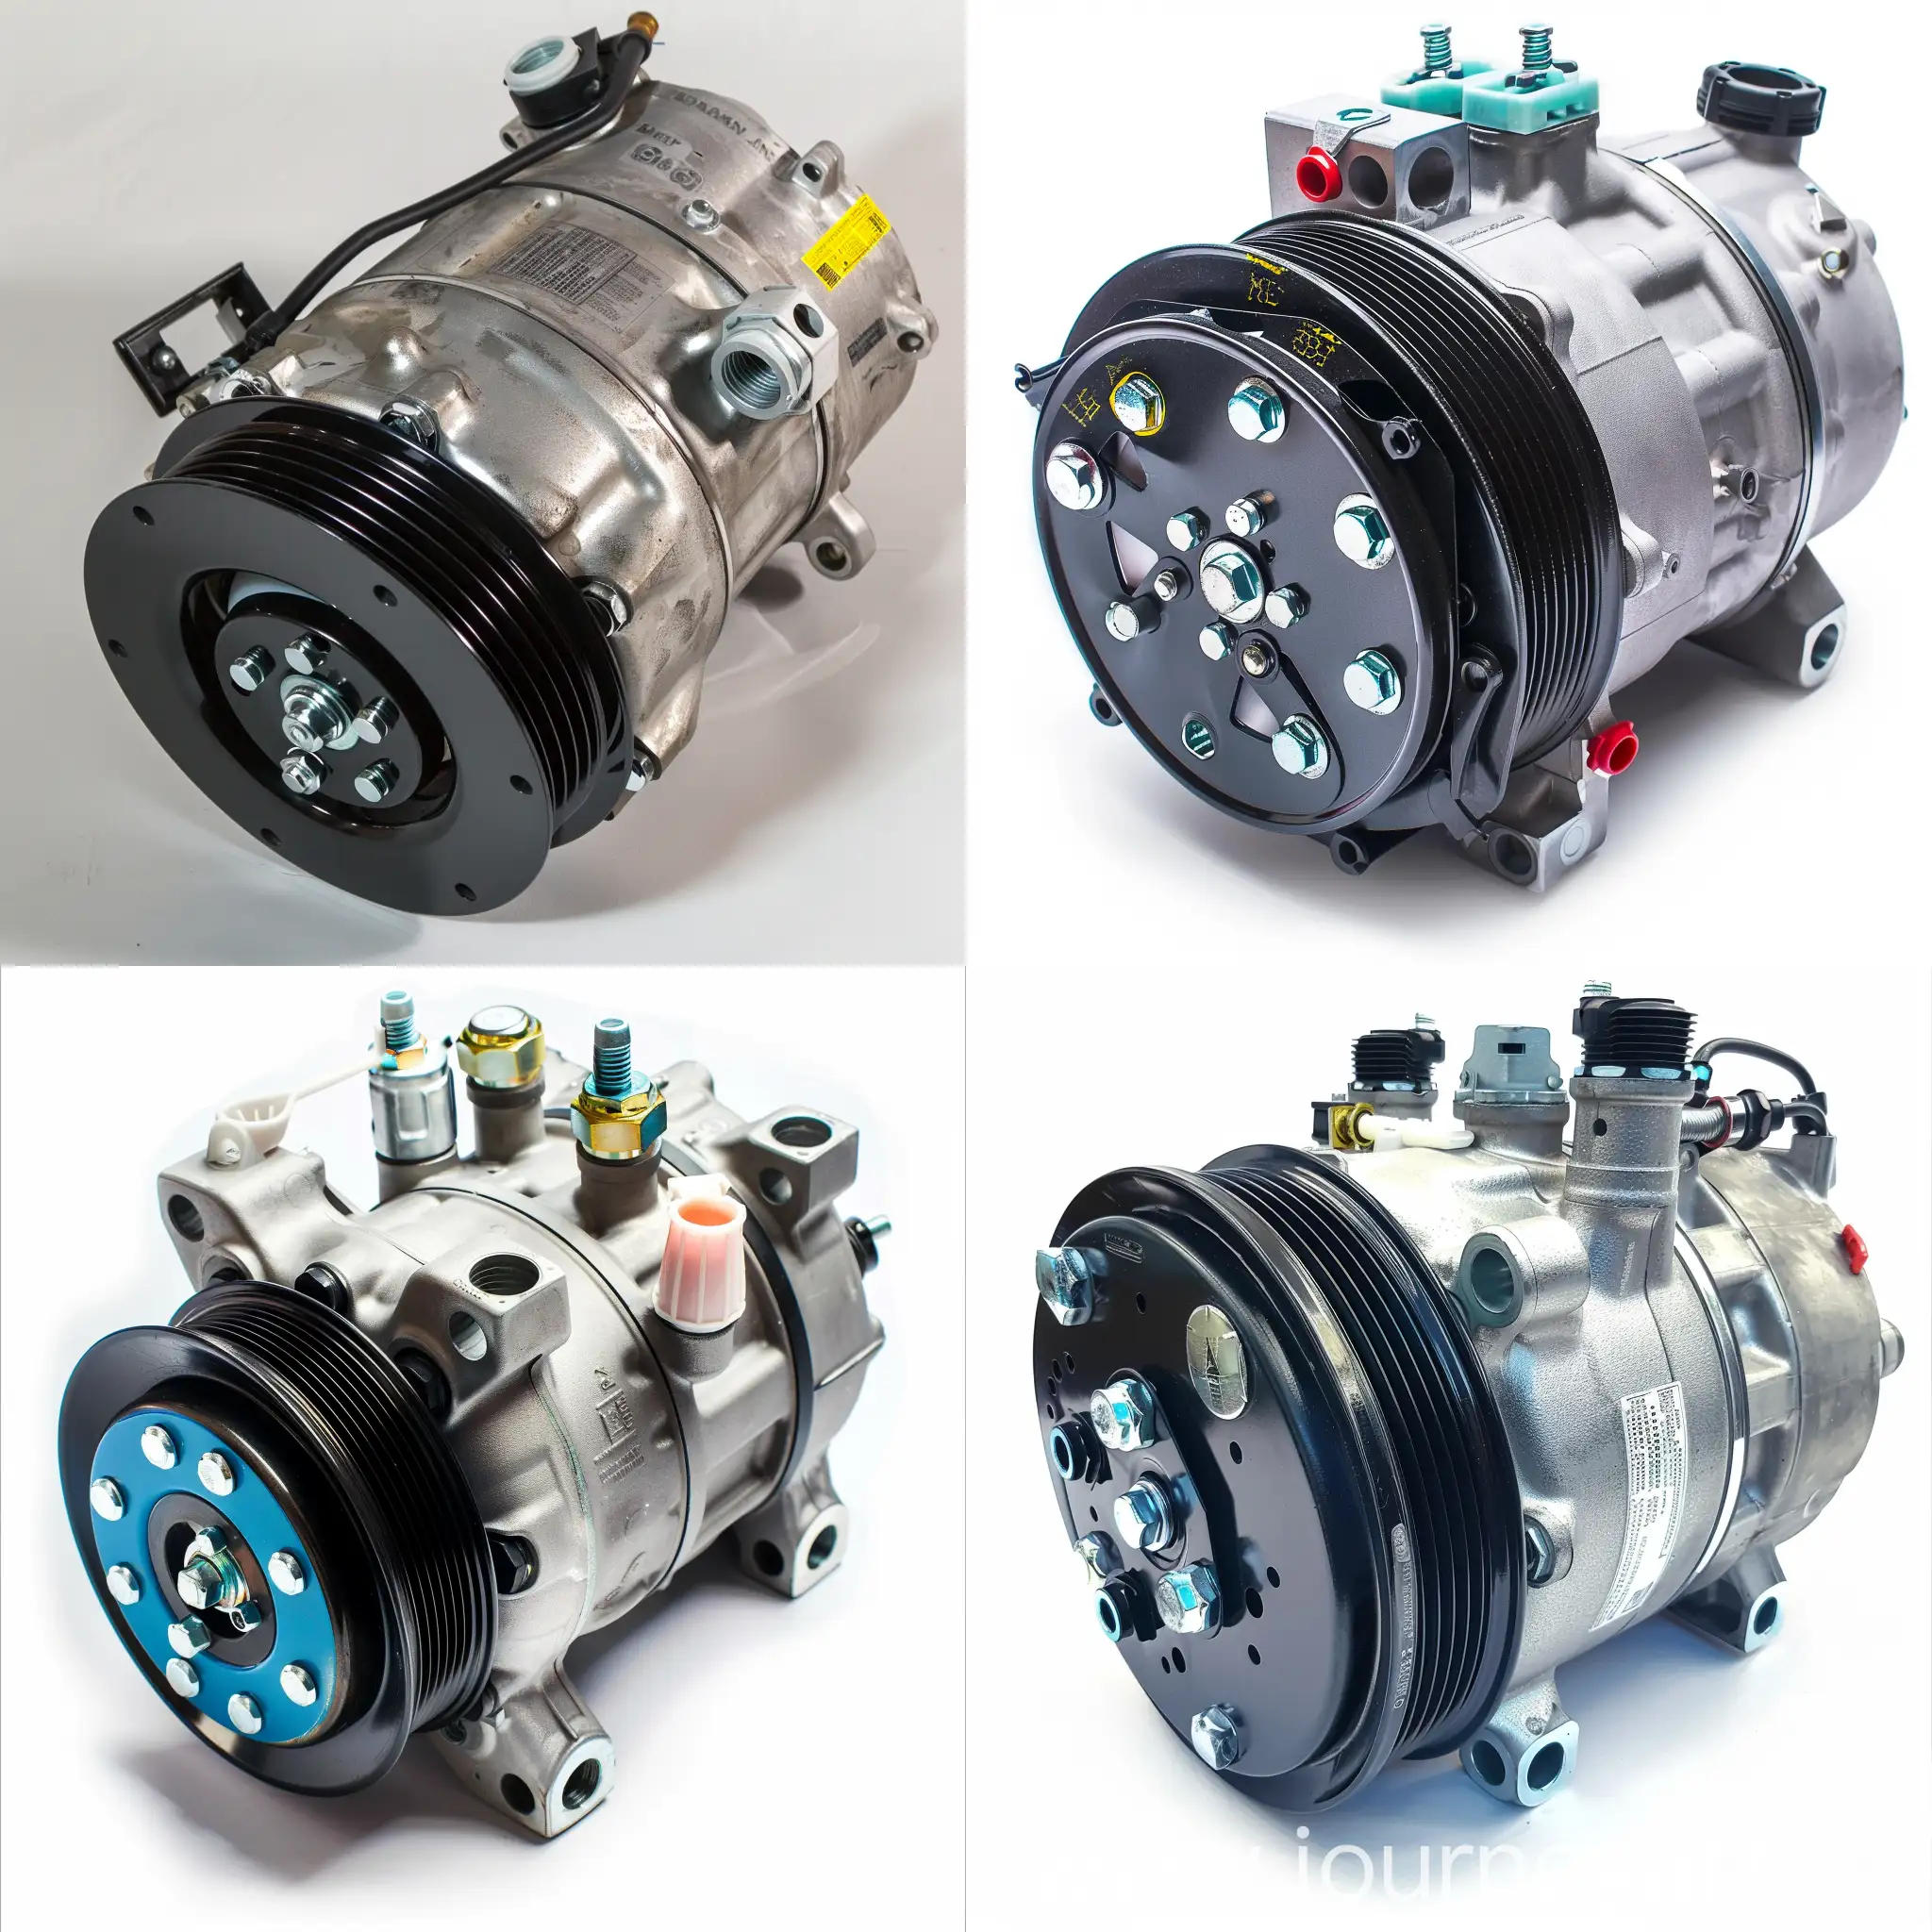 Car-Air-Conditioning-System-Components-Condenser-Evaporator-and-Expansion-Valve